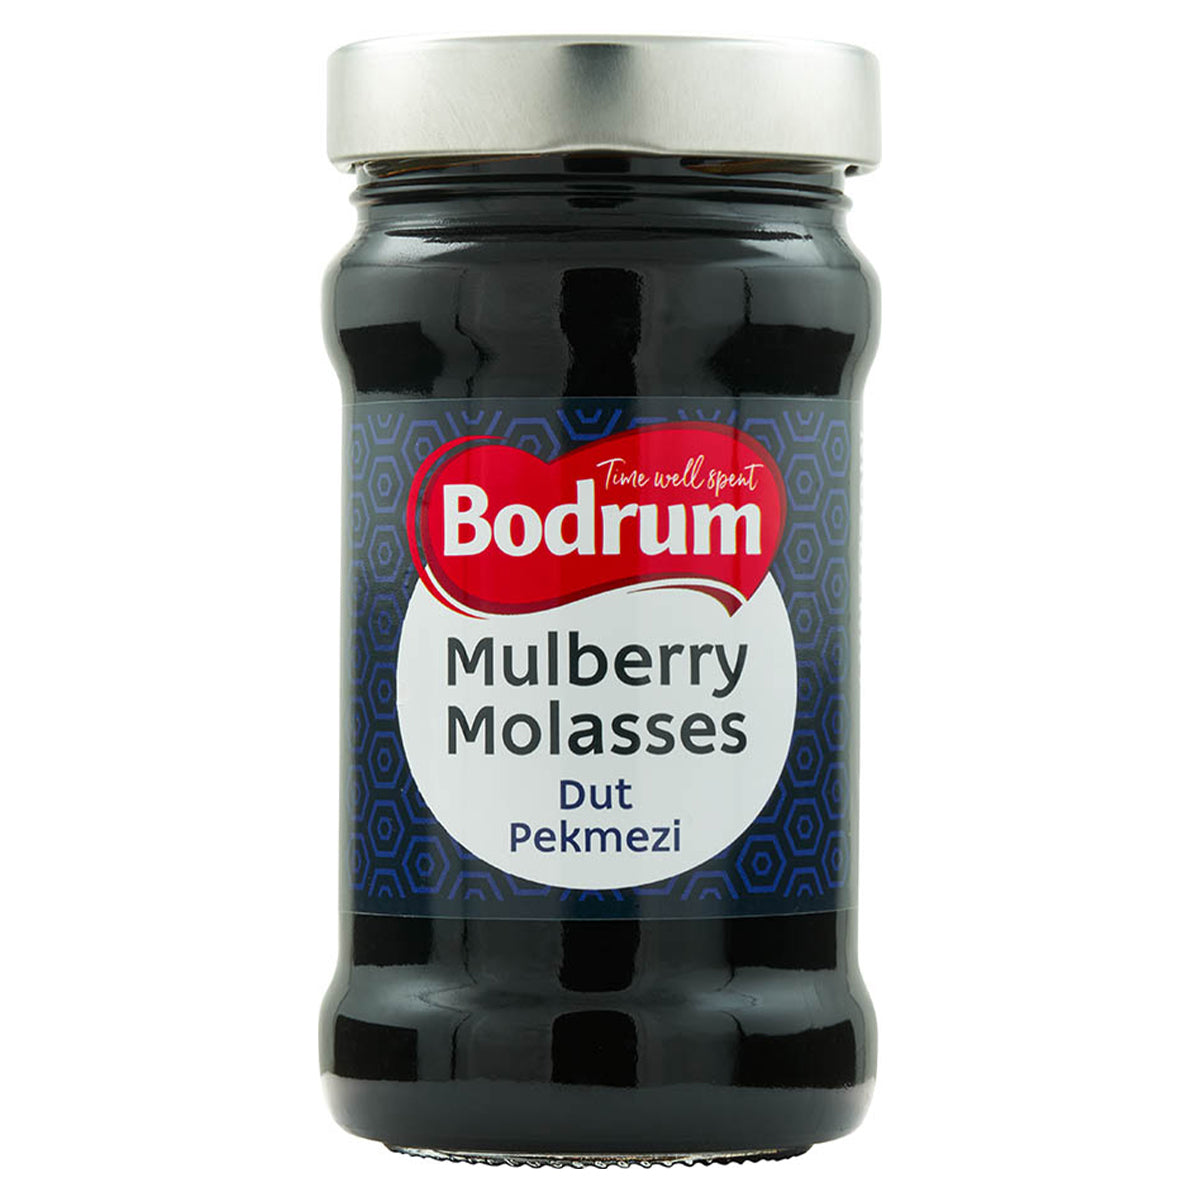 Bodrum - Mulberry Molasses - 380g - Continental Food Store